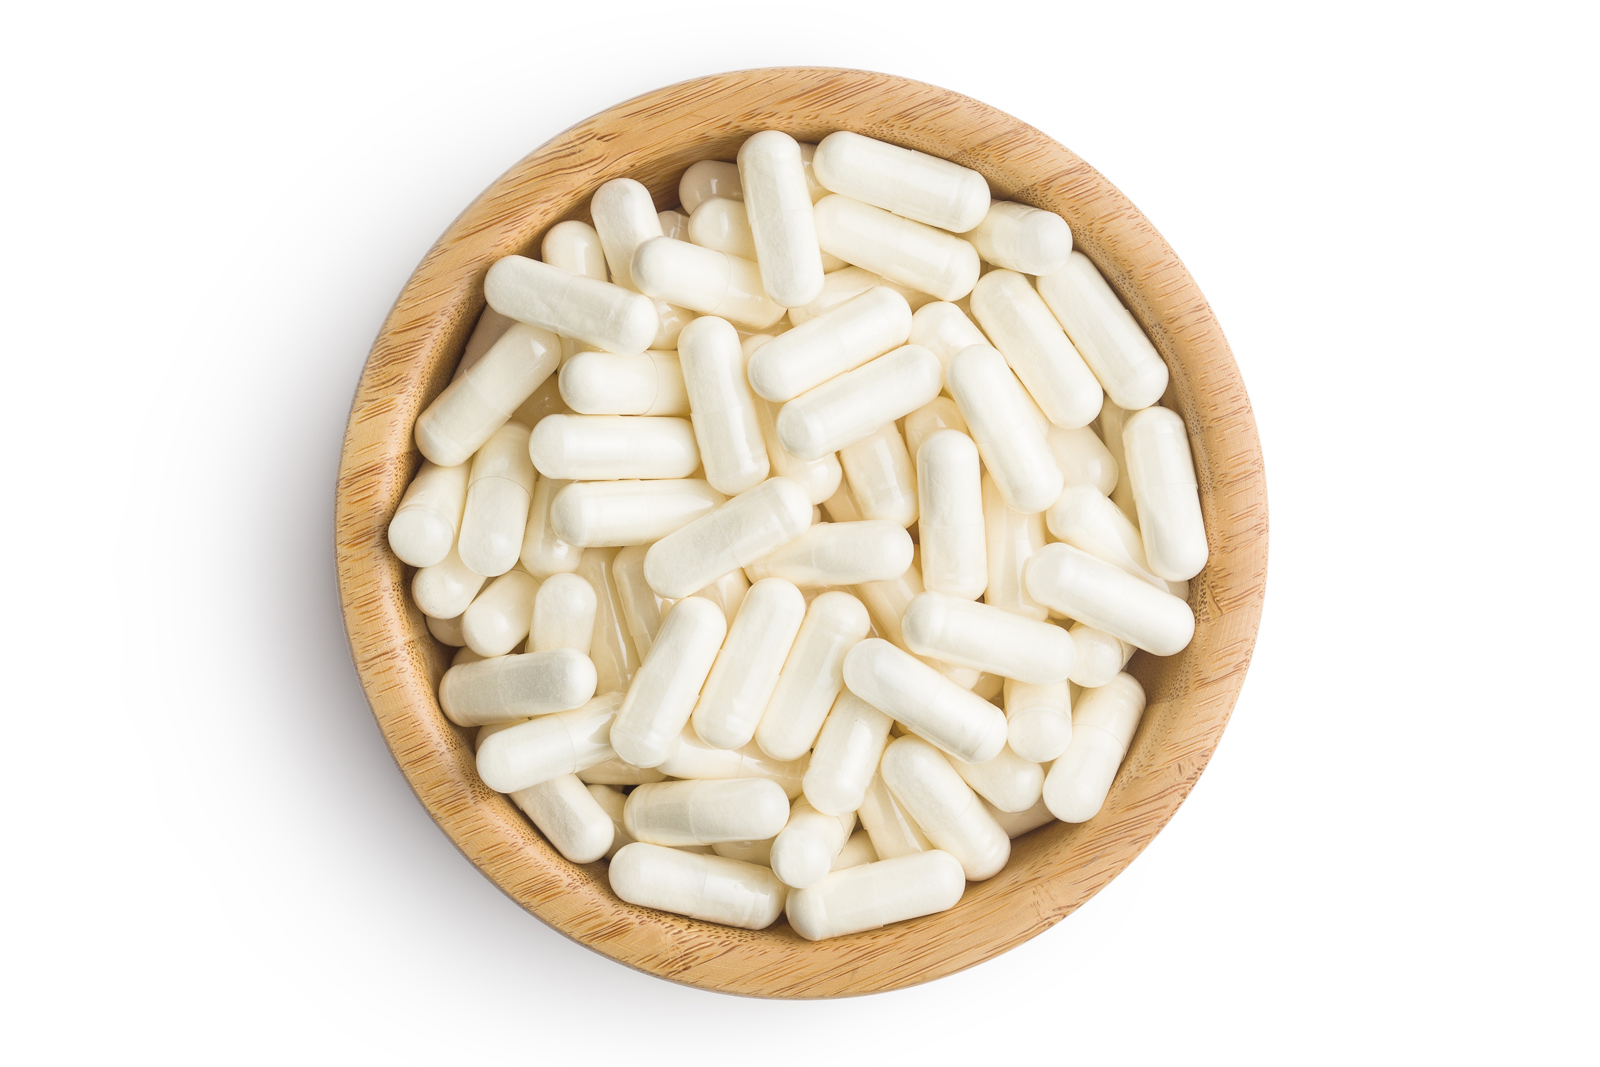 Lactobacillus Acidophilus Probiotics Market: Expanding Opportunities in the Growing Health and Wellness Industry